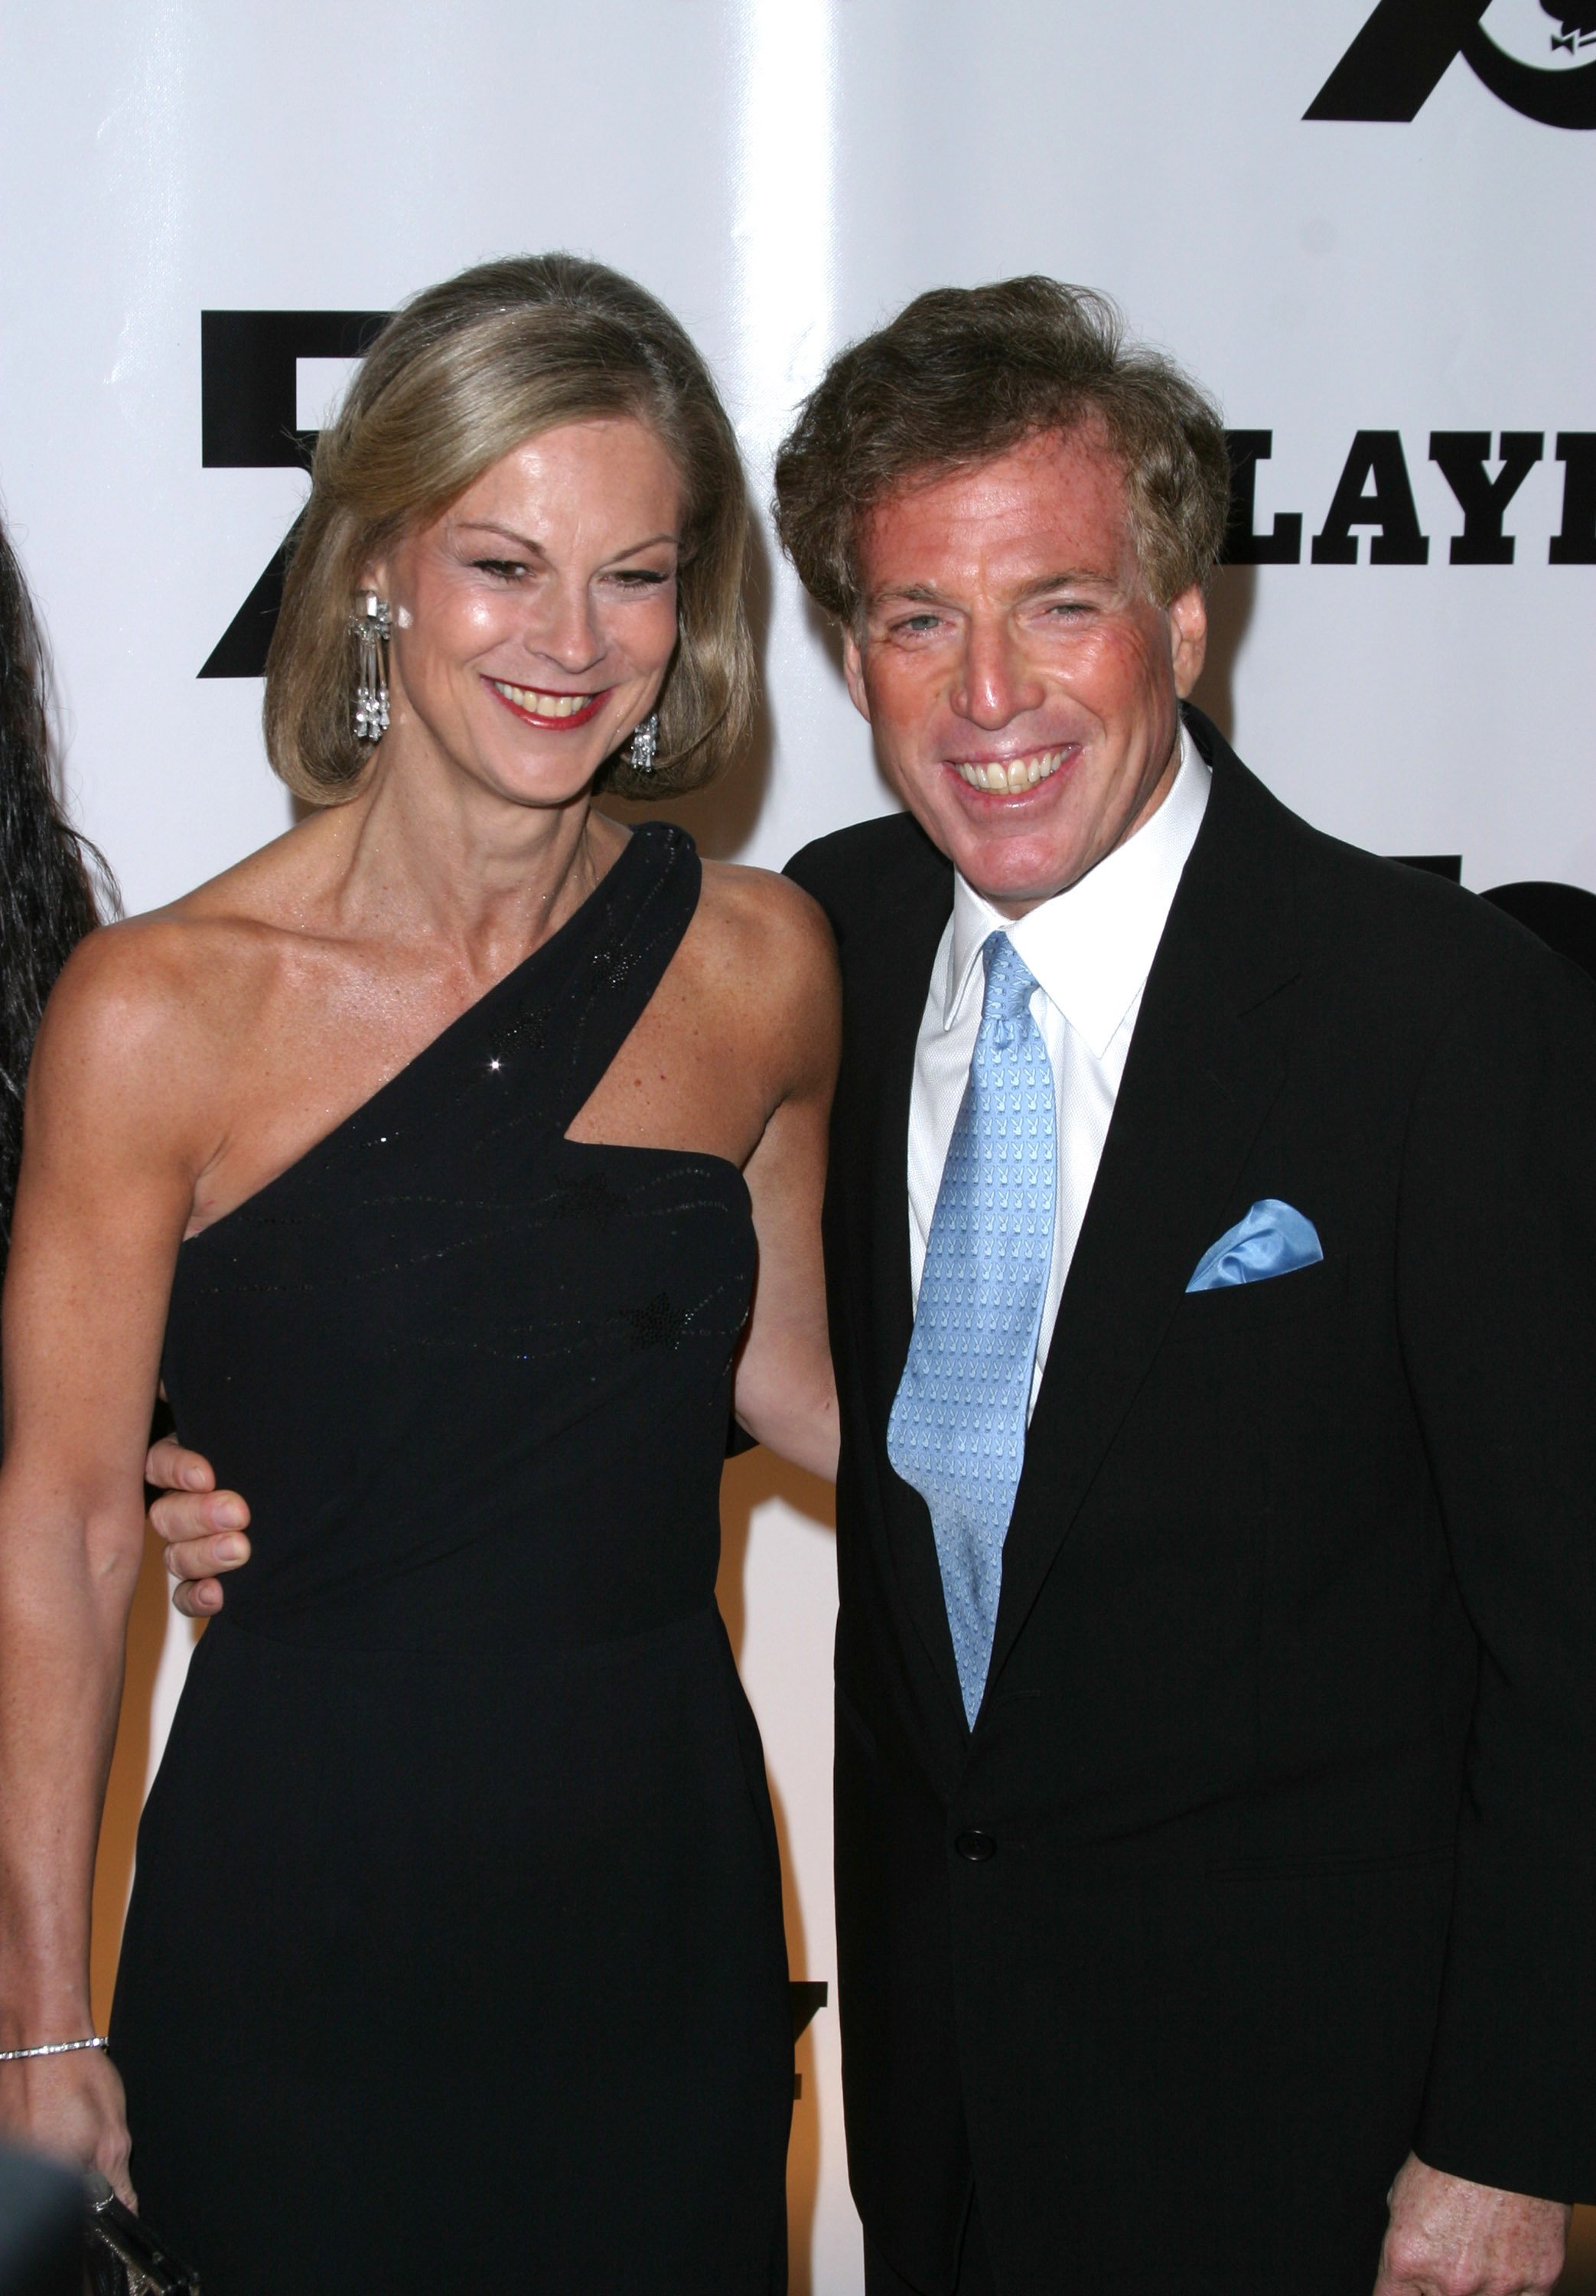 Christie Hefner and Bill Marovitz pose on the red carpet during Playboy's 50th Anniversary Celebration in New York City | Source: Getty Images